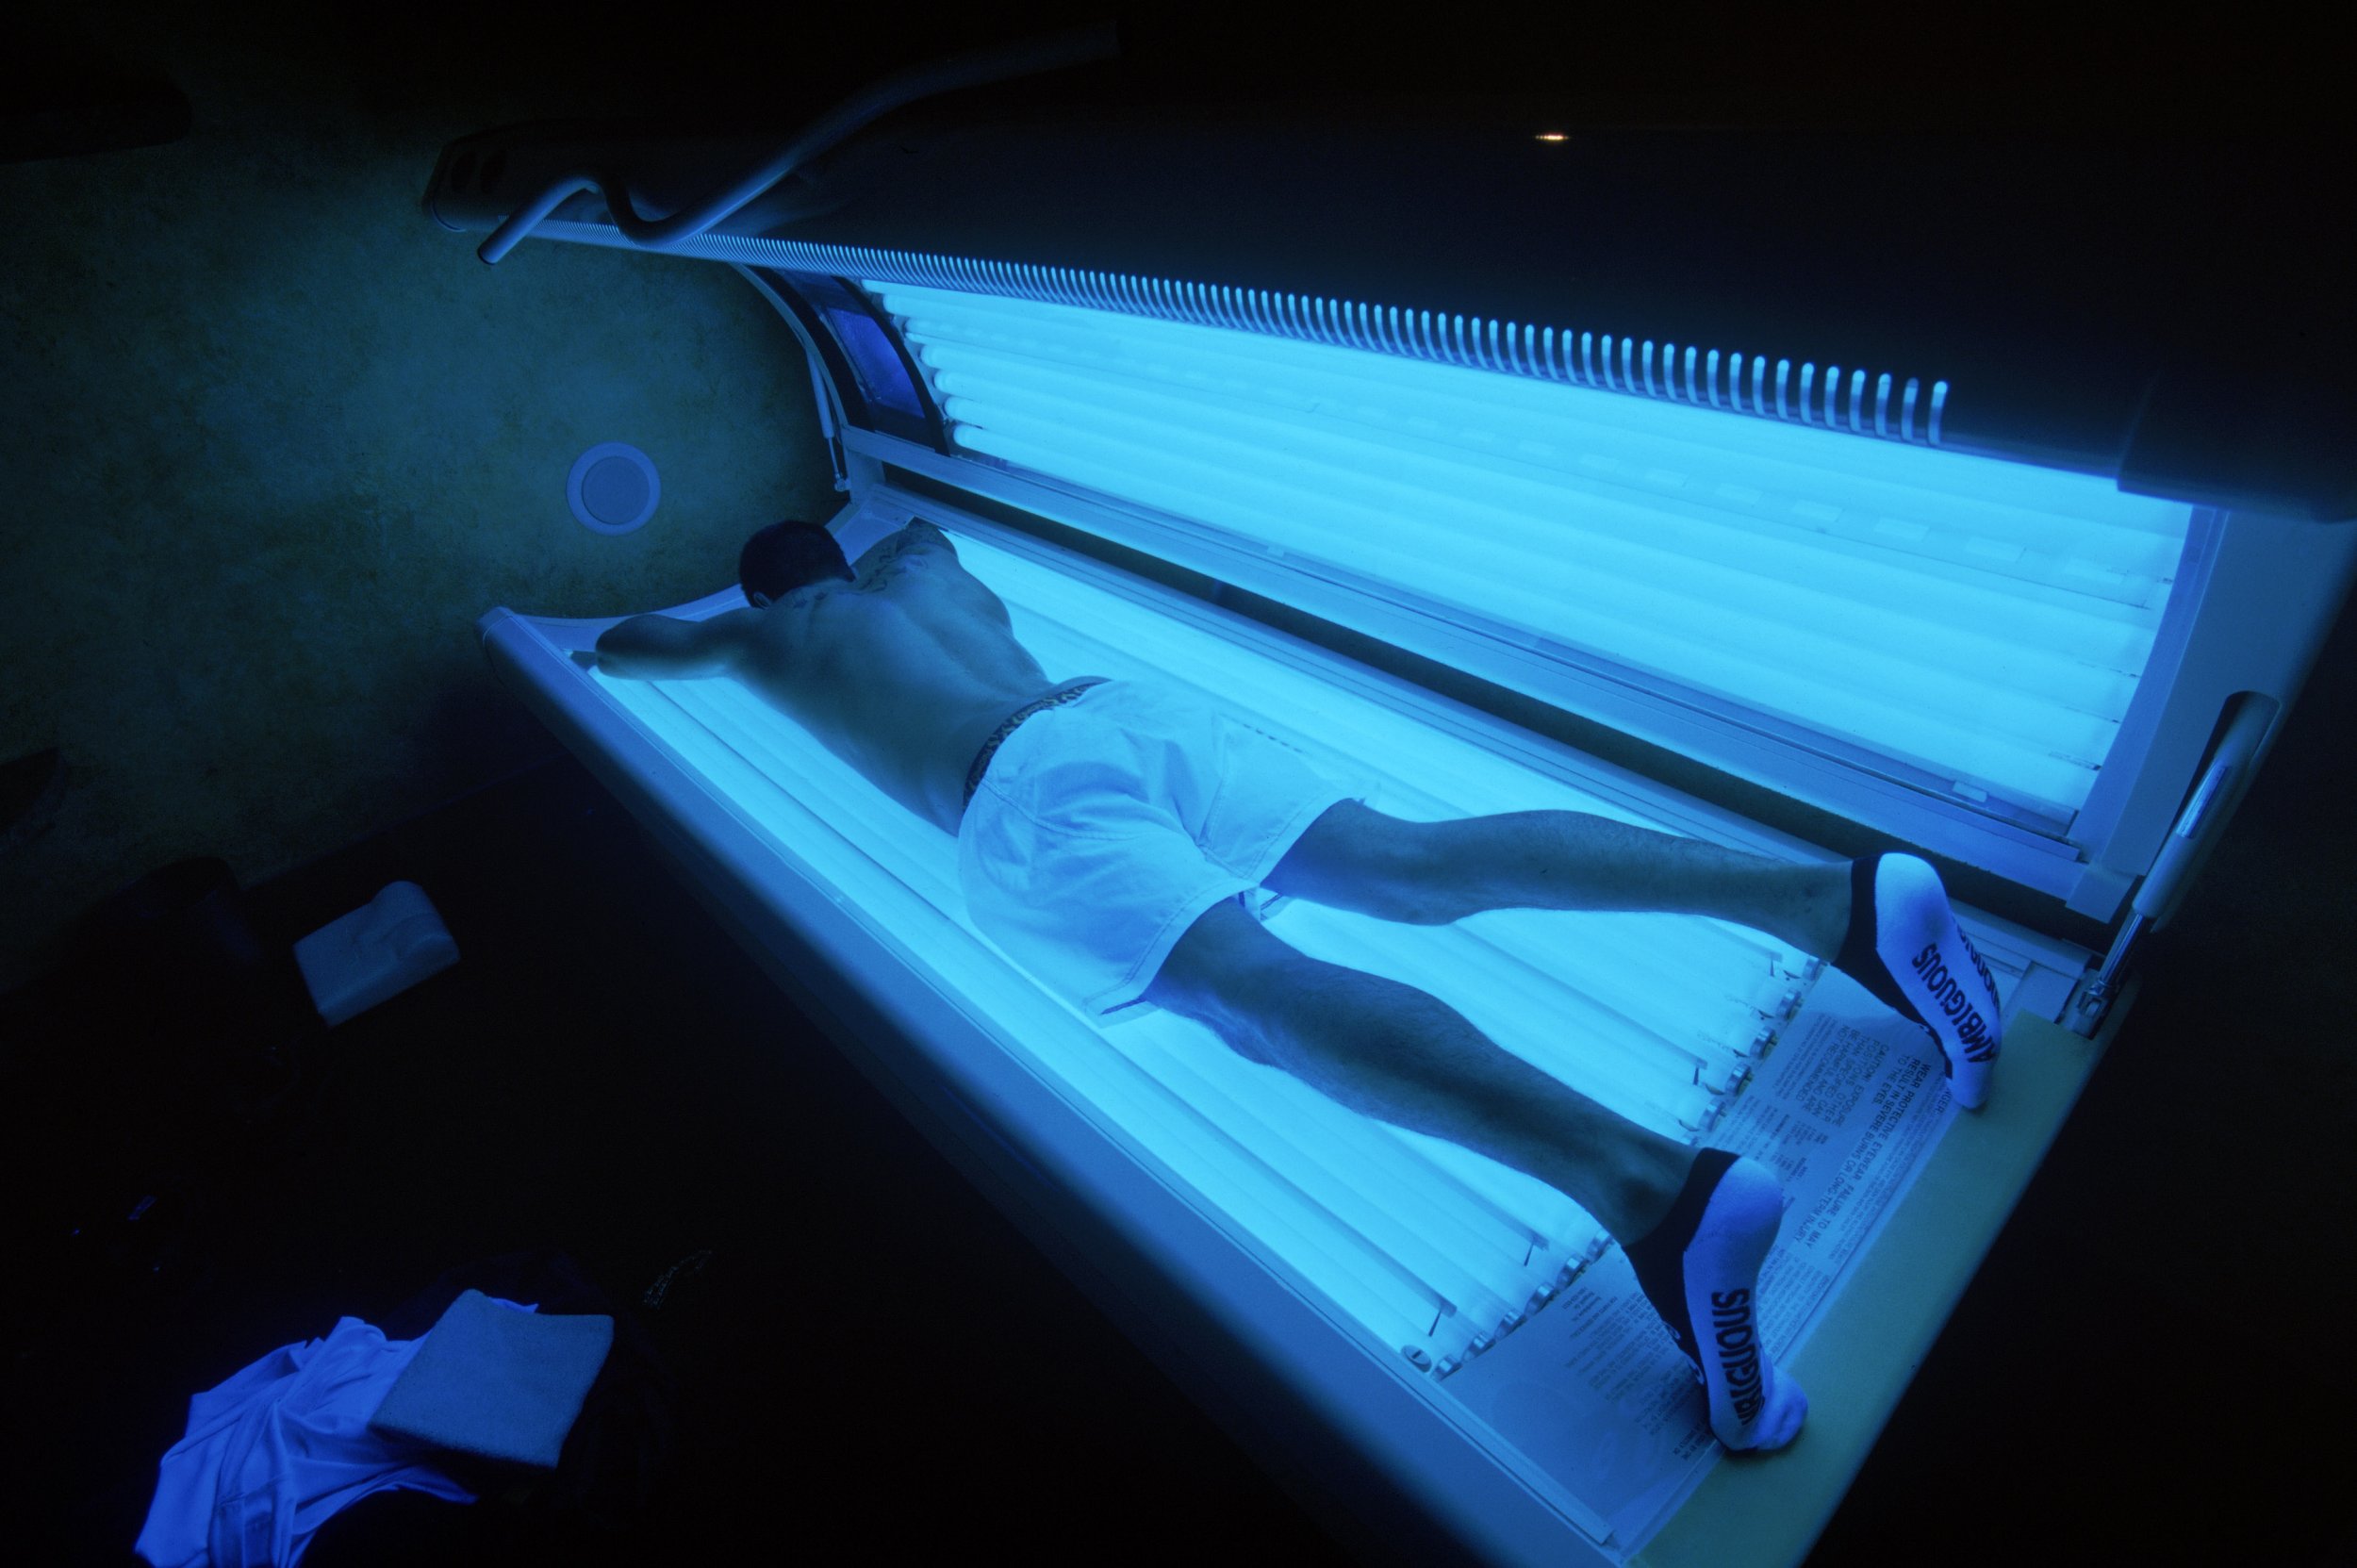 You can get addicted to tanning beds just like drugs and alcohol.